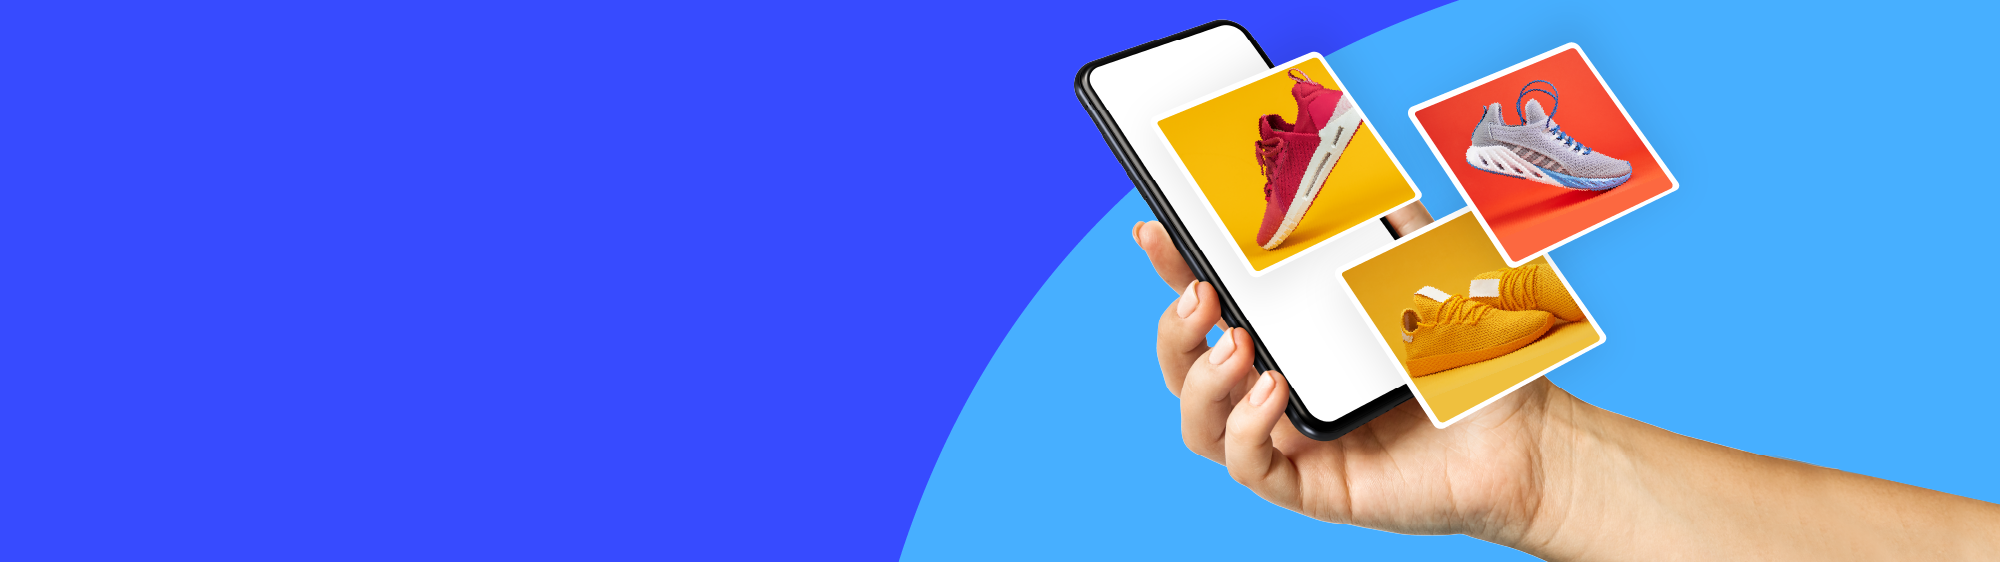 Hand holding a mobile phone with fly out images of red, blue, and yellow sneakers